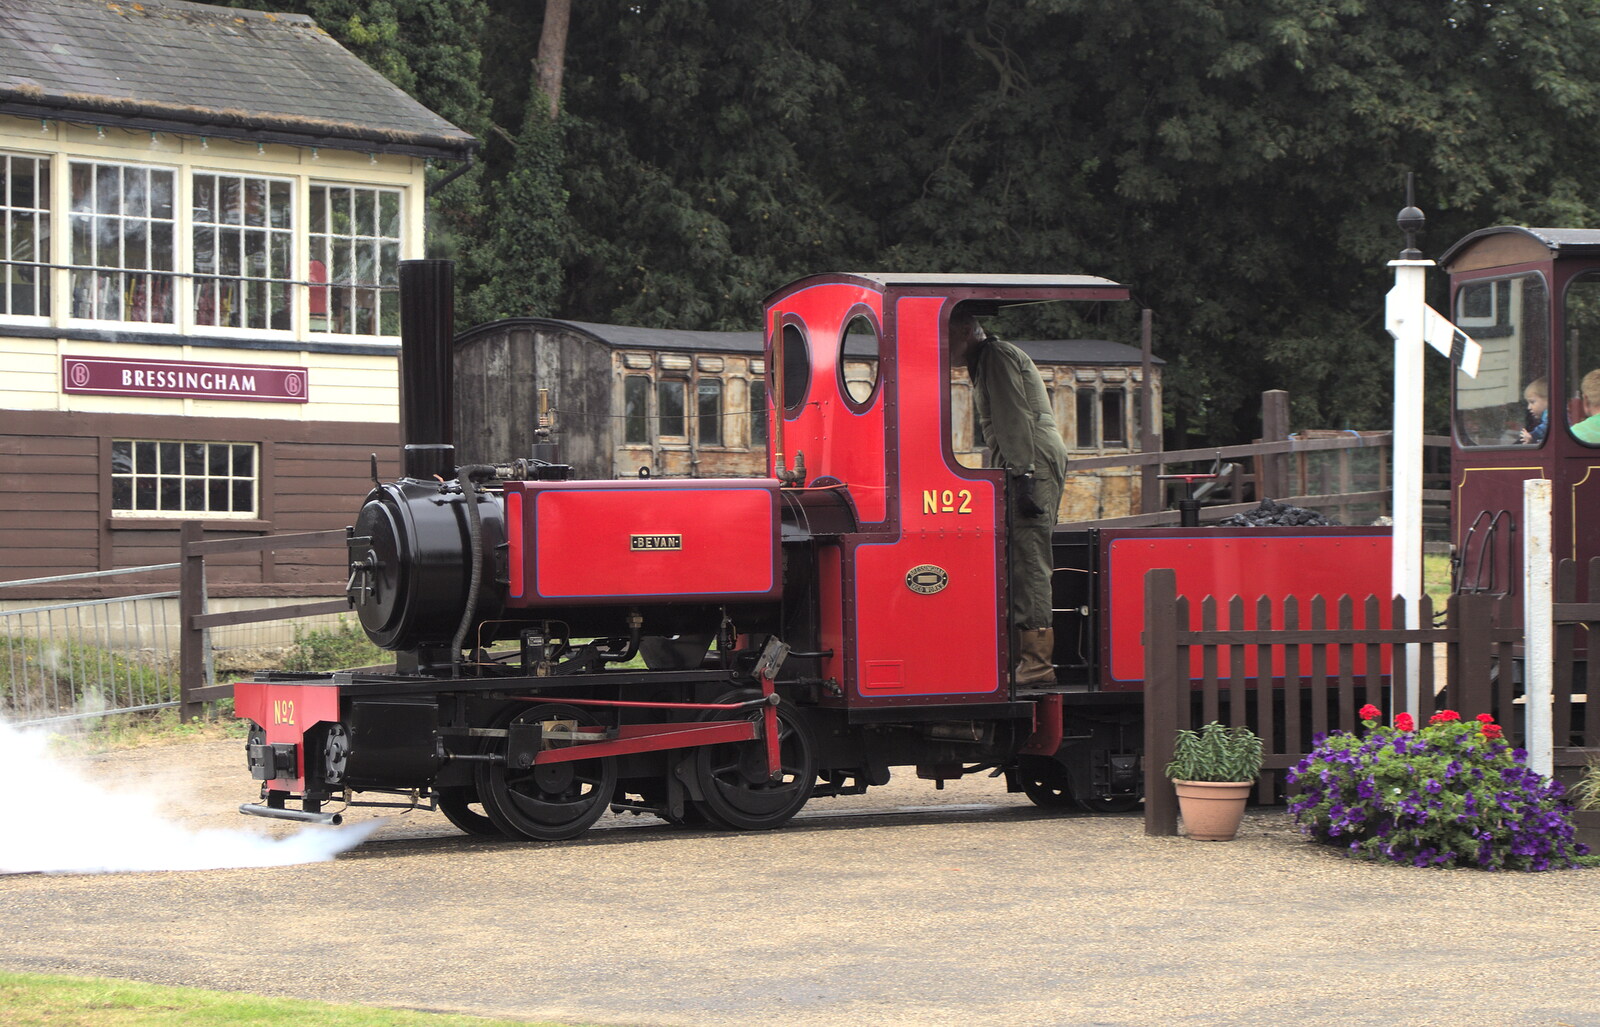 Narrow-gauge engine Bevan heads past the signal box from A Bressingham Steam Day, Norfolk, 27th August 2012